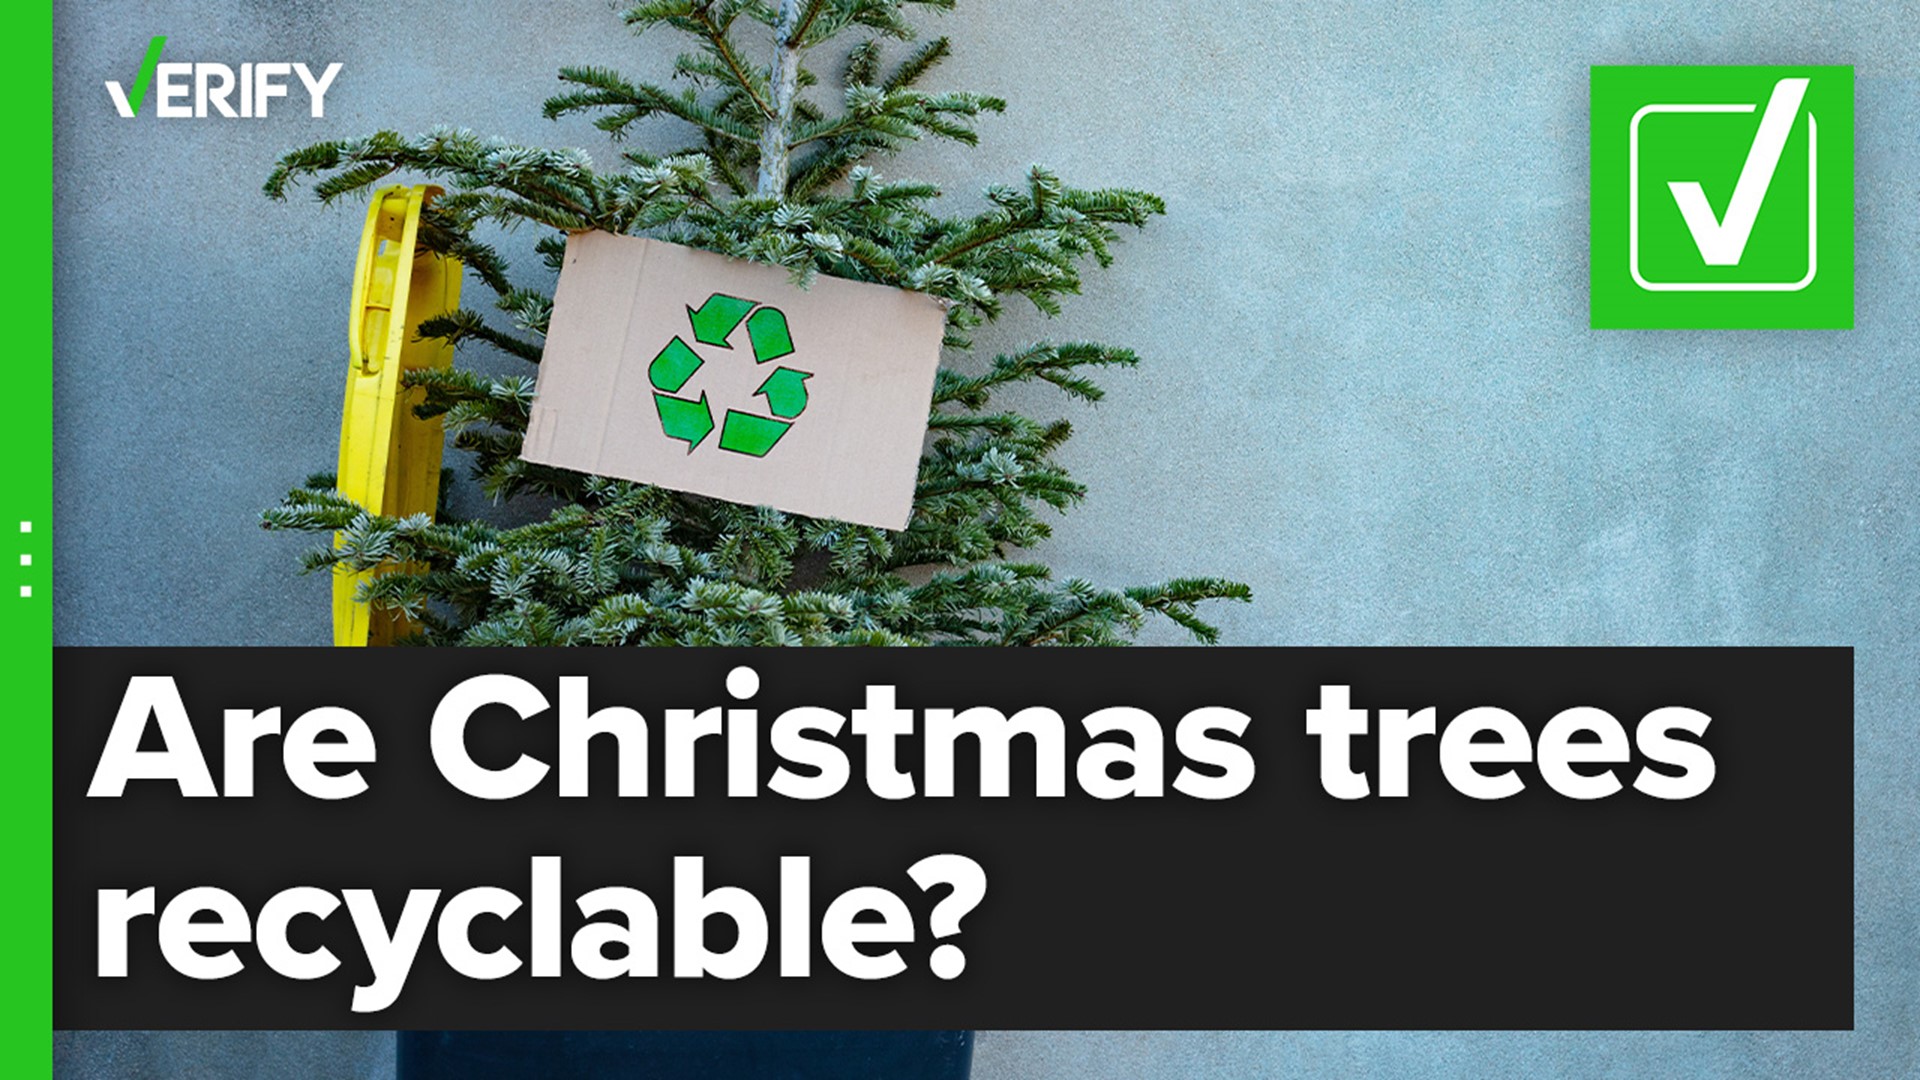 Many municipalities offer ways to recycle live Christmas trees, so long as they meet local requirements